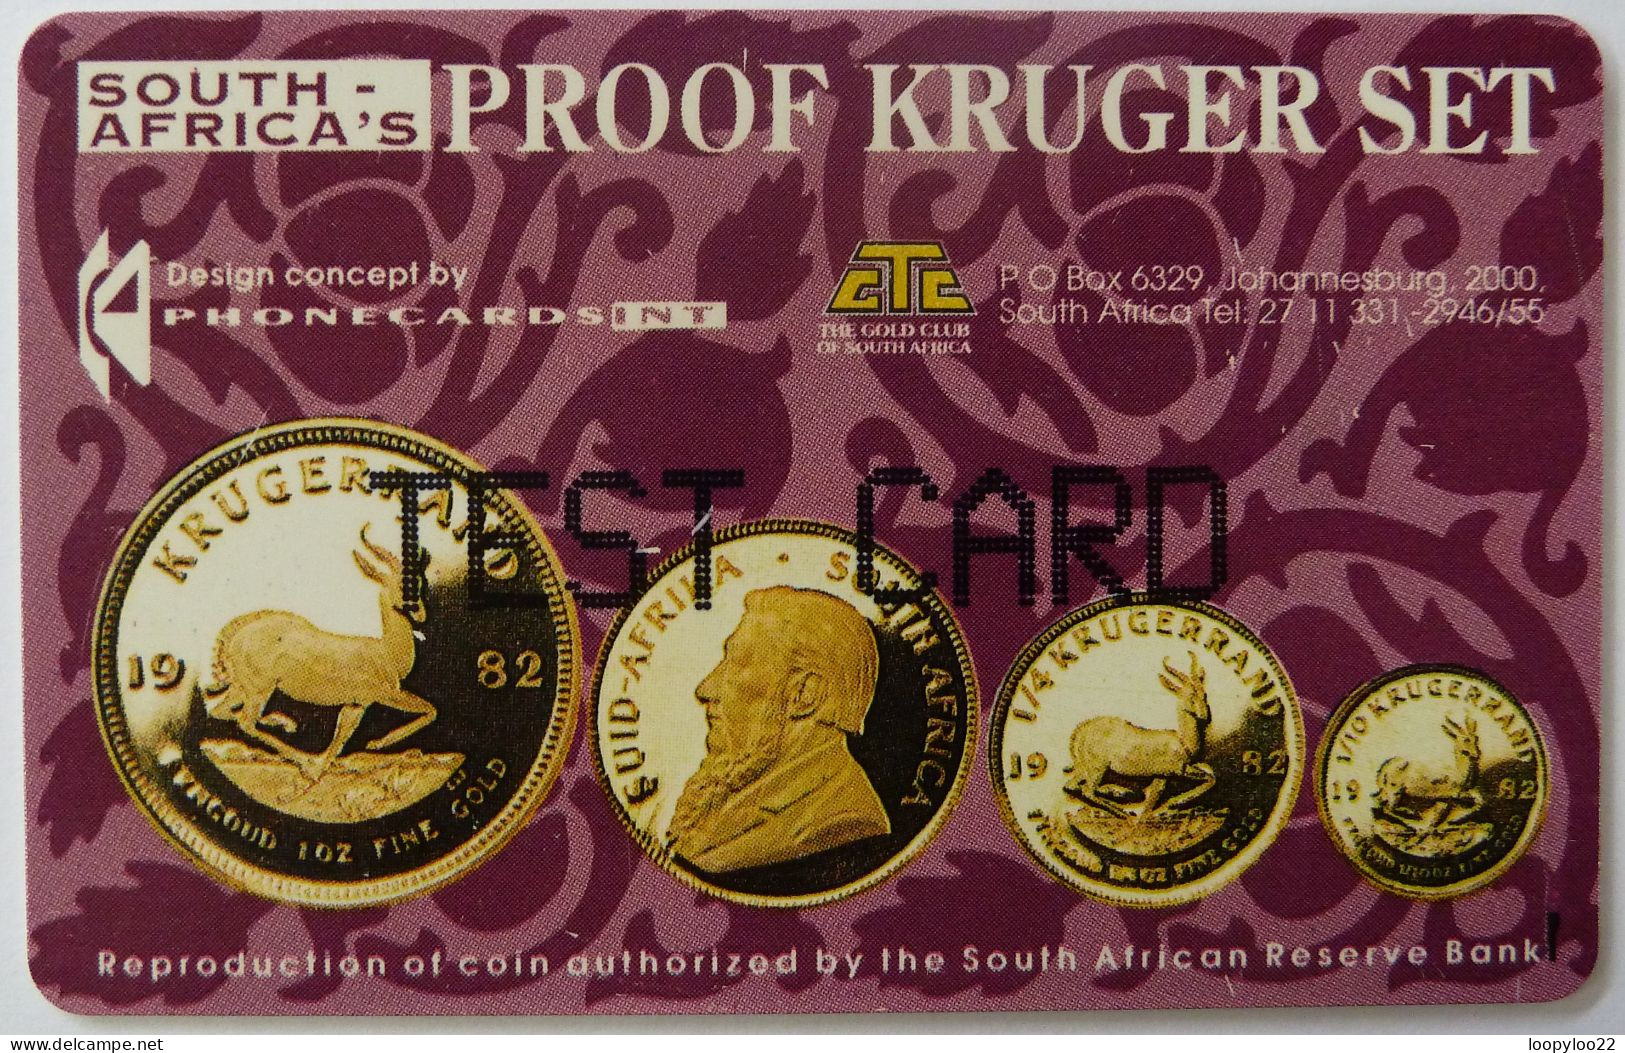 SOUTH AFRICA - TEST CARD - Proof Kruger Set - R20 - With 080 - RRR - South Africa